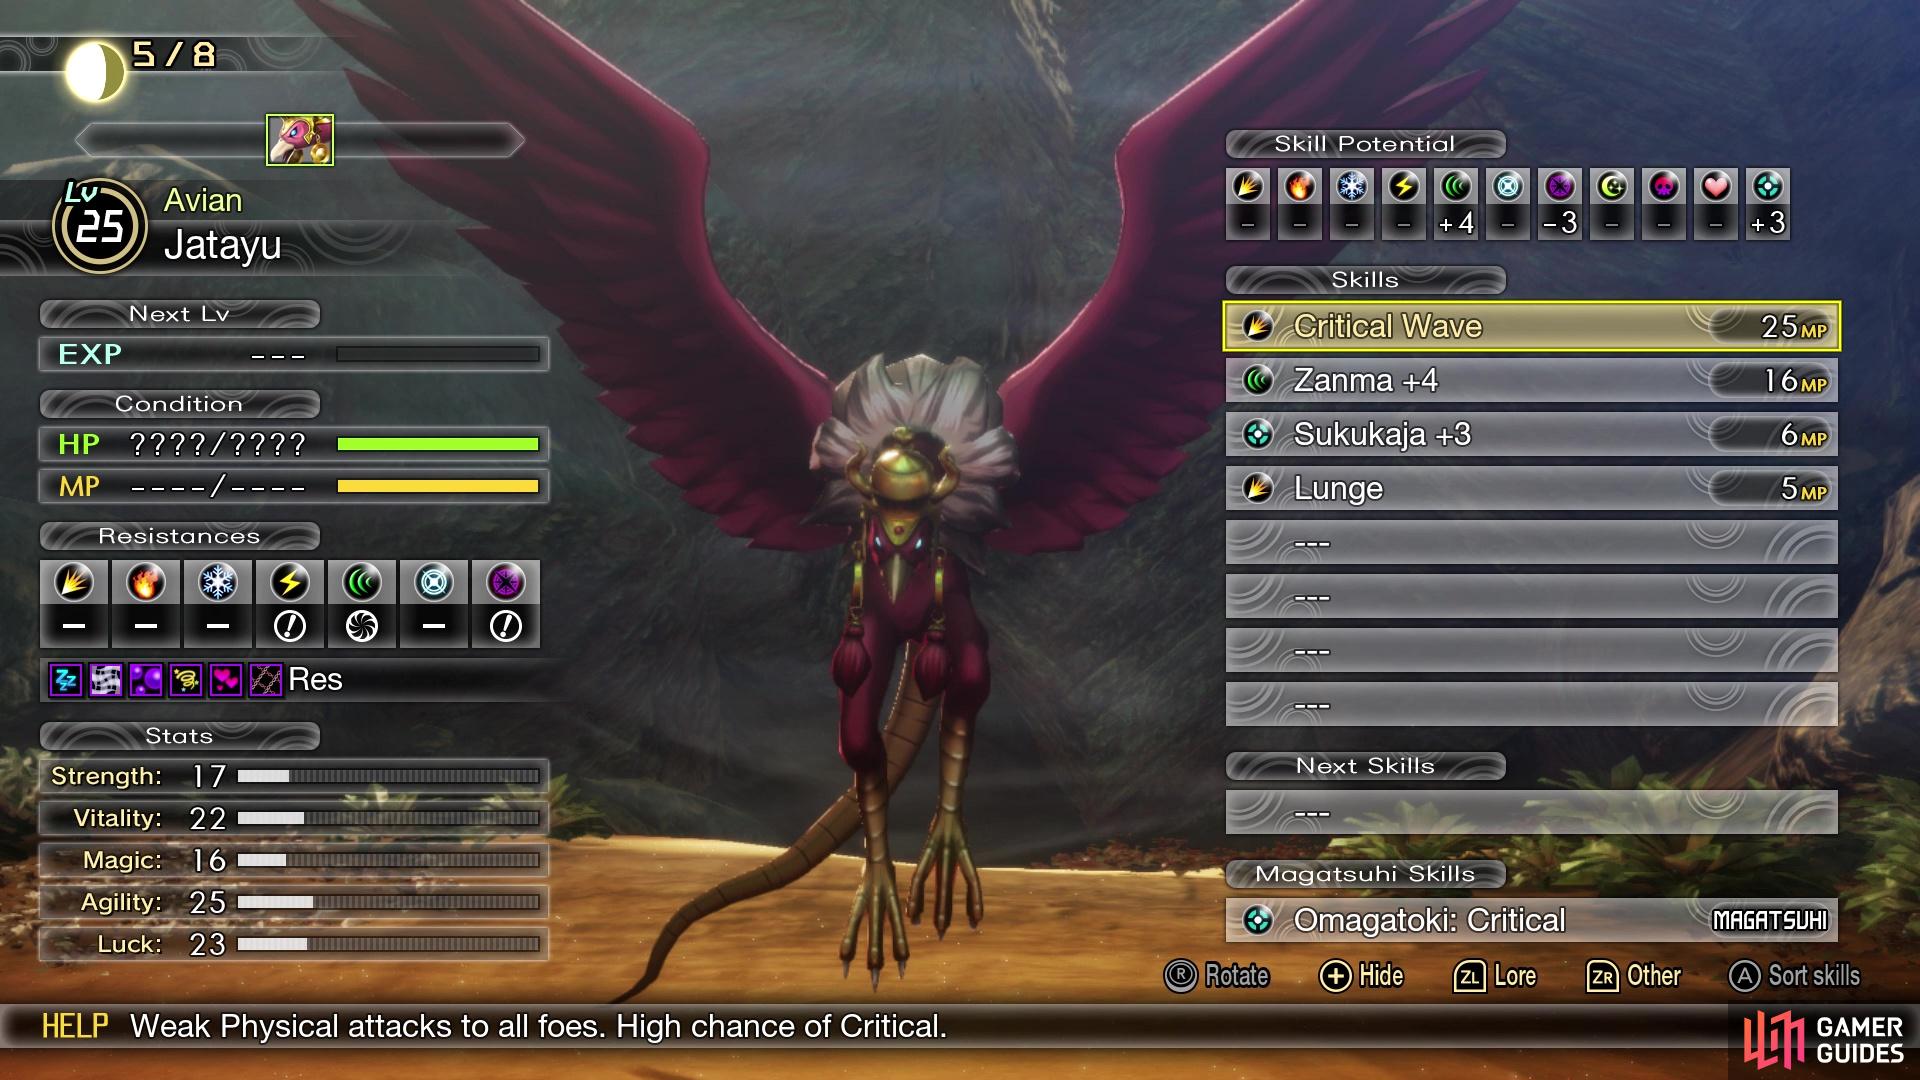 Jatayu will likely be the first Punishing Foe you will fight